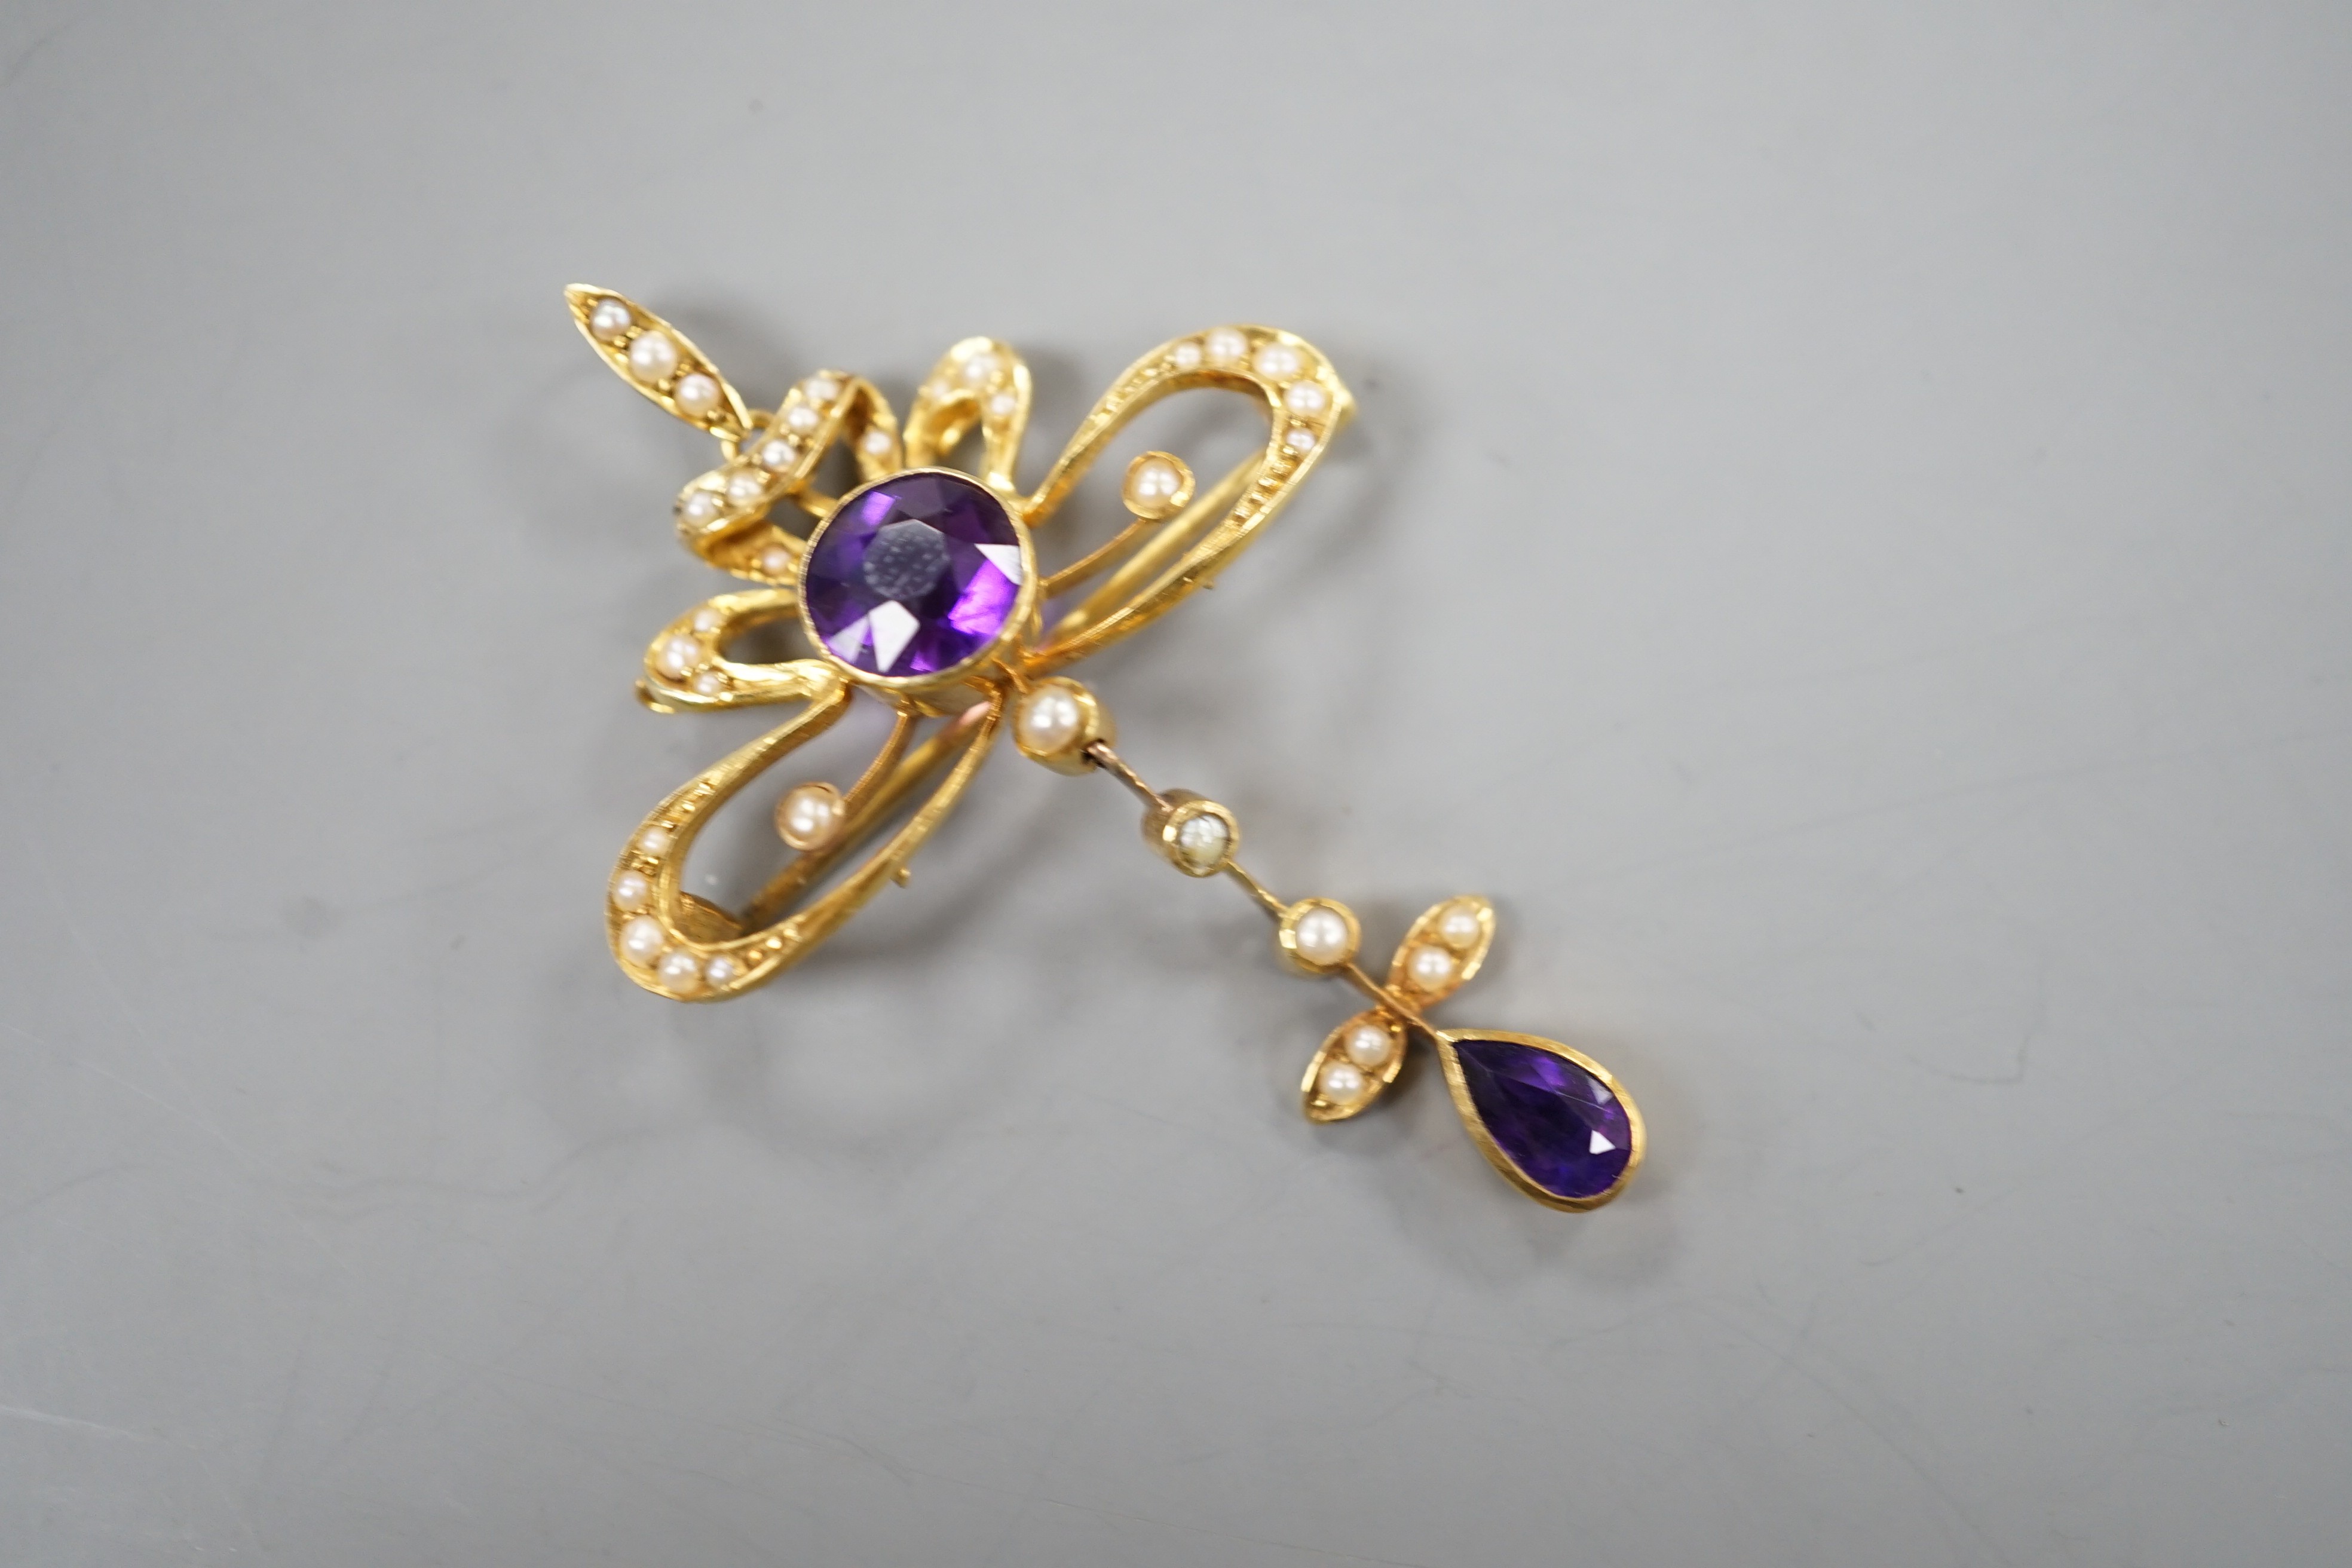 An Edwardian 15ct, amethyst and seed pearl set drop pendant brooch, overall 49mm, gross weight 5.3 grams.